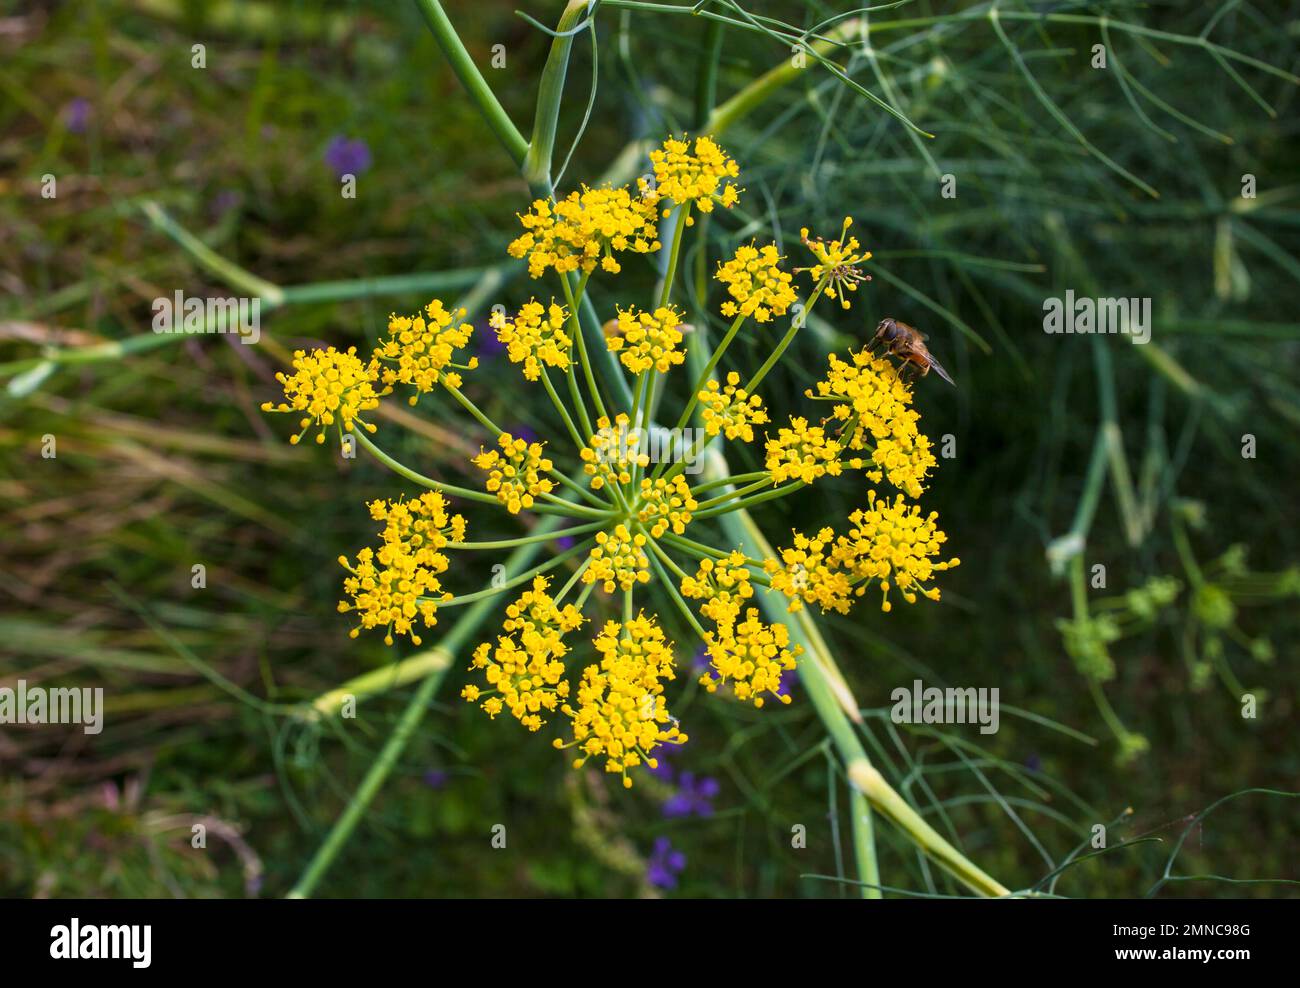 A Look at life in New Zealand: some of the wonderful herbs and veggies in my organic garden. Fennel( Foeniculum vulgare) in flower. Stock Photo